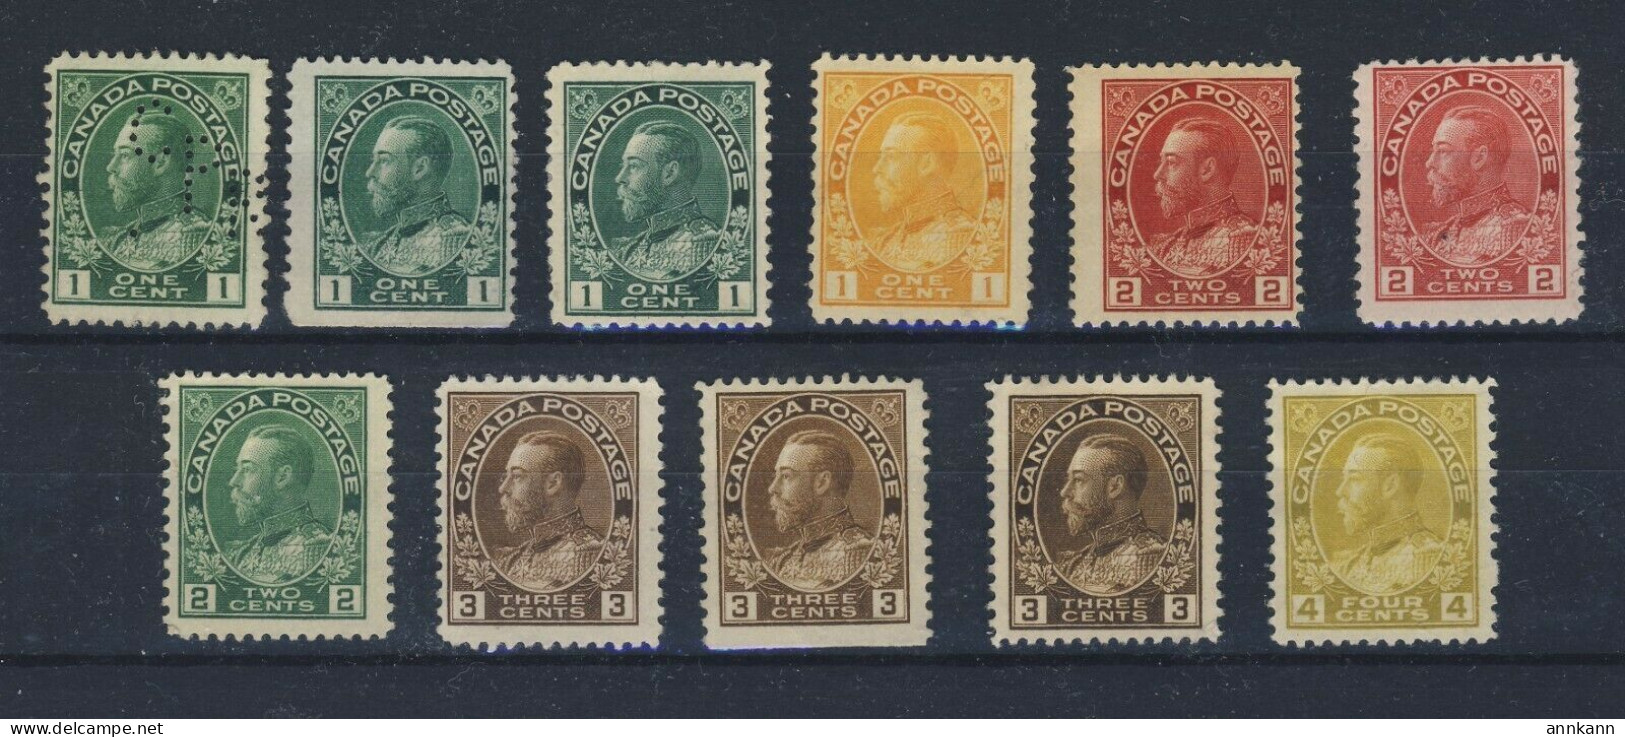 11x Canada Admiral M & U Stamps 3x #104-105-106-106c-107-108x3 110 GV= $184.00 - Used Stamps